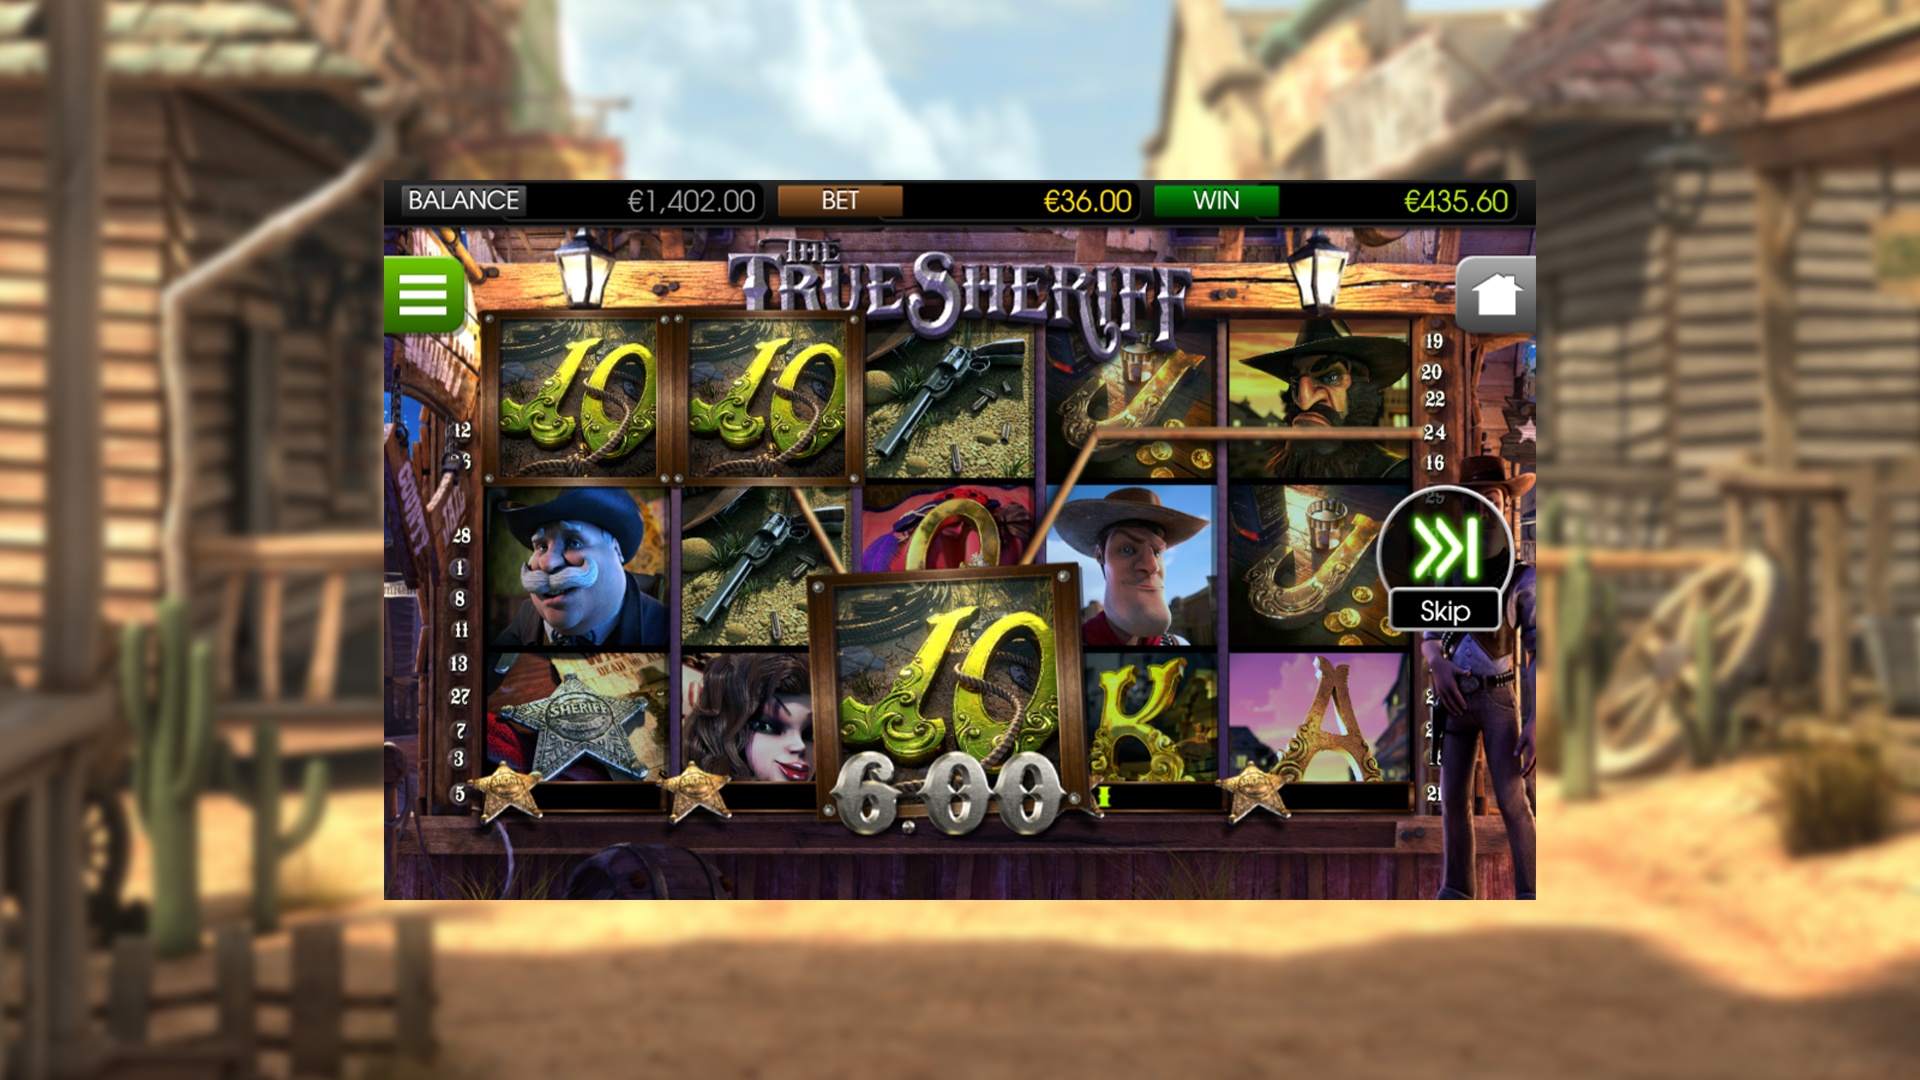 The True Sheriff - Free Spins